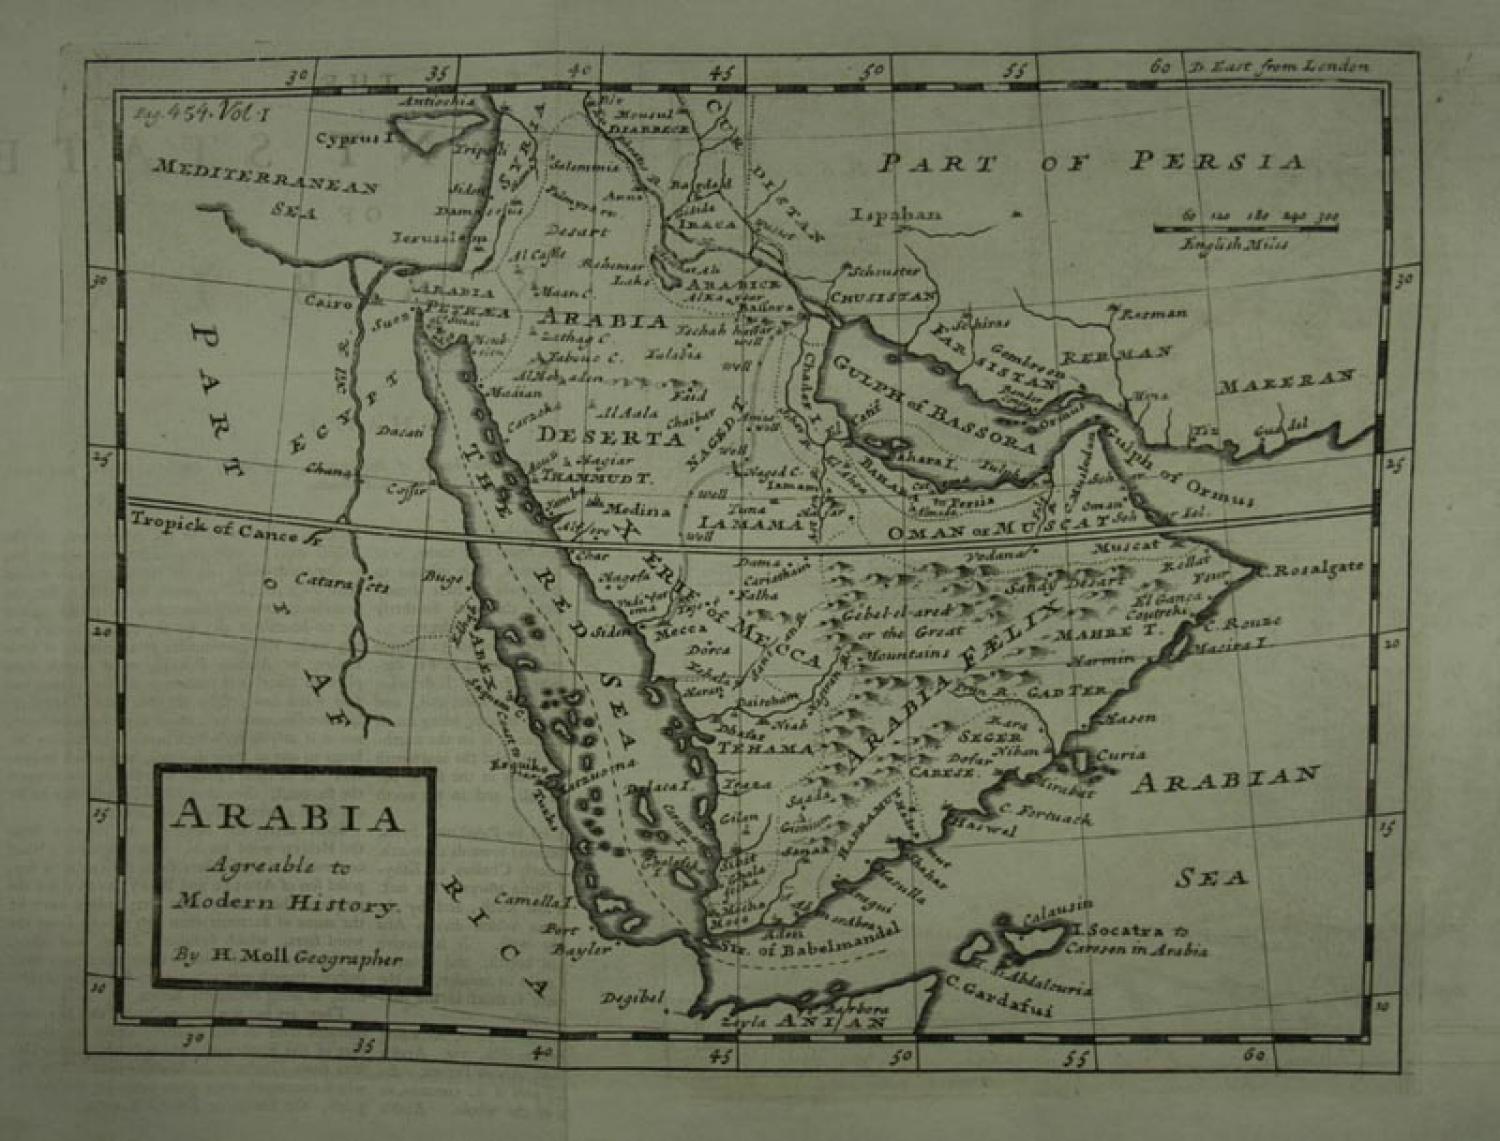 SOLD Arabia. Agreeable to Modern History